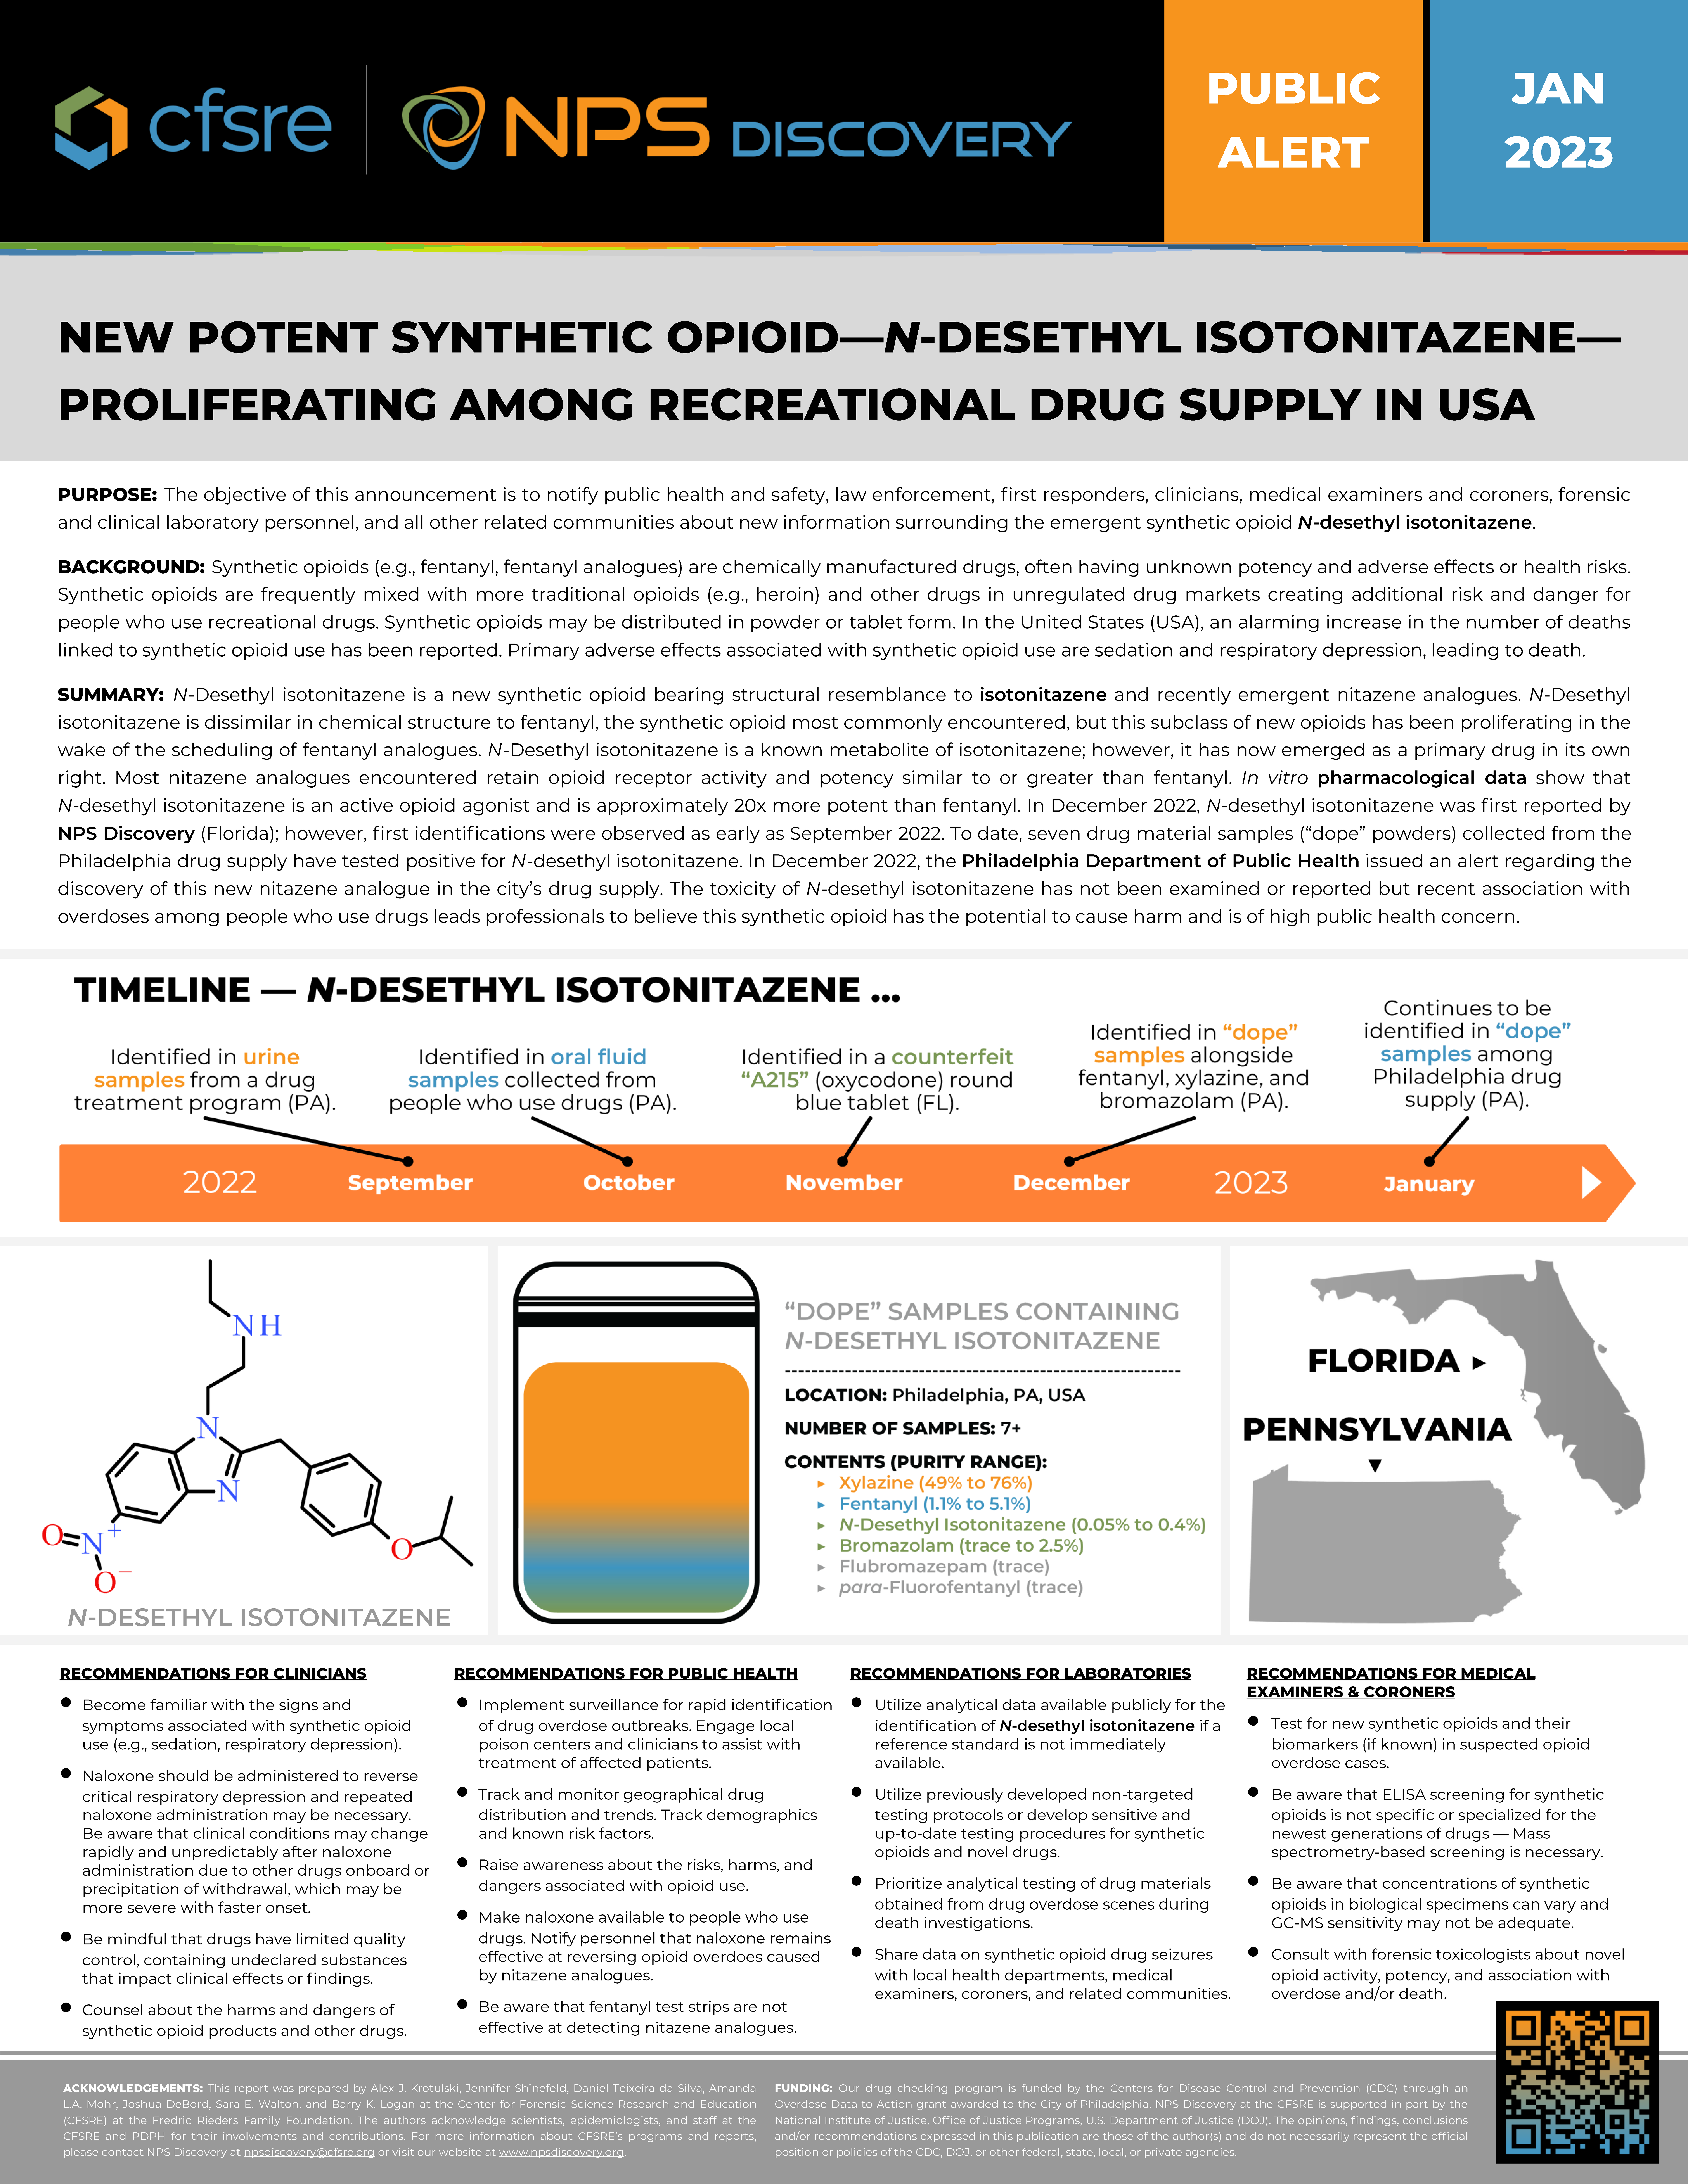 New Potent Synthetic Opioid—N-Desethyl Isotonitazene—Proliferating Among Recreational Drug Supply in USA